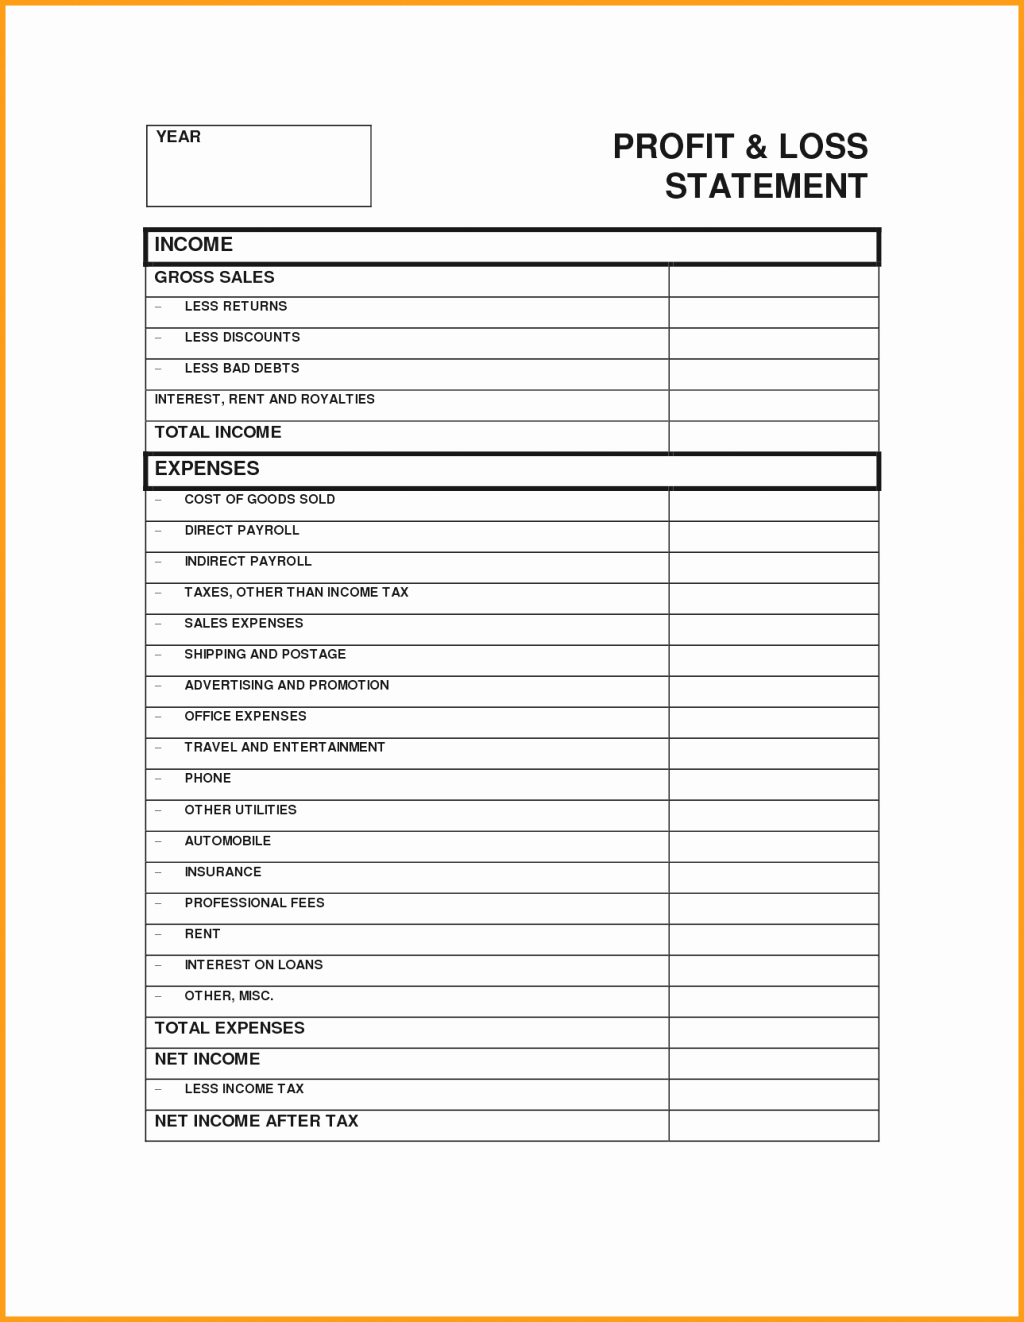 Basic Profit and Loss Template Fresh Simple Profit Loss Statement Training Material Template